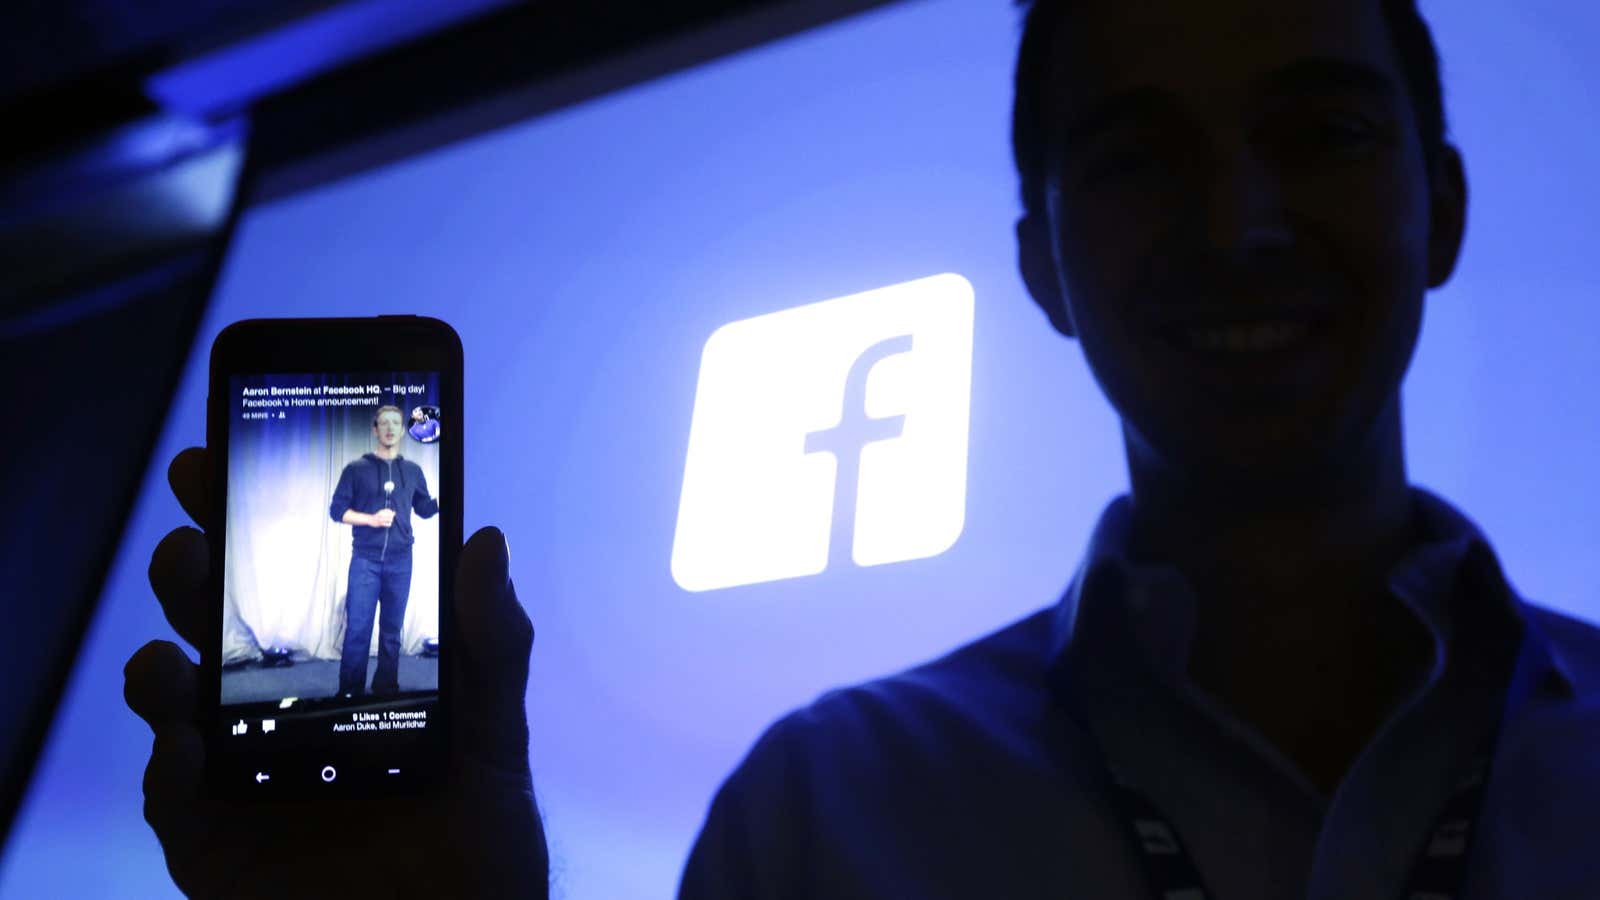 Facebook is successfully making the transition to mobile—and leaving its profits behind.